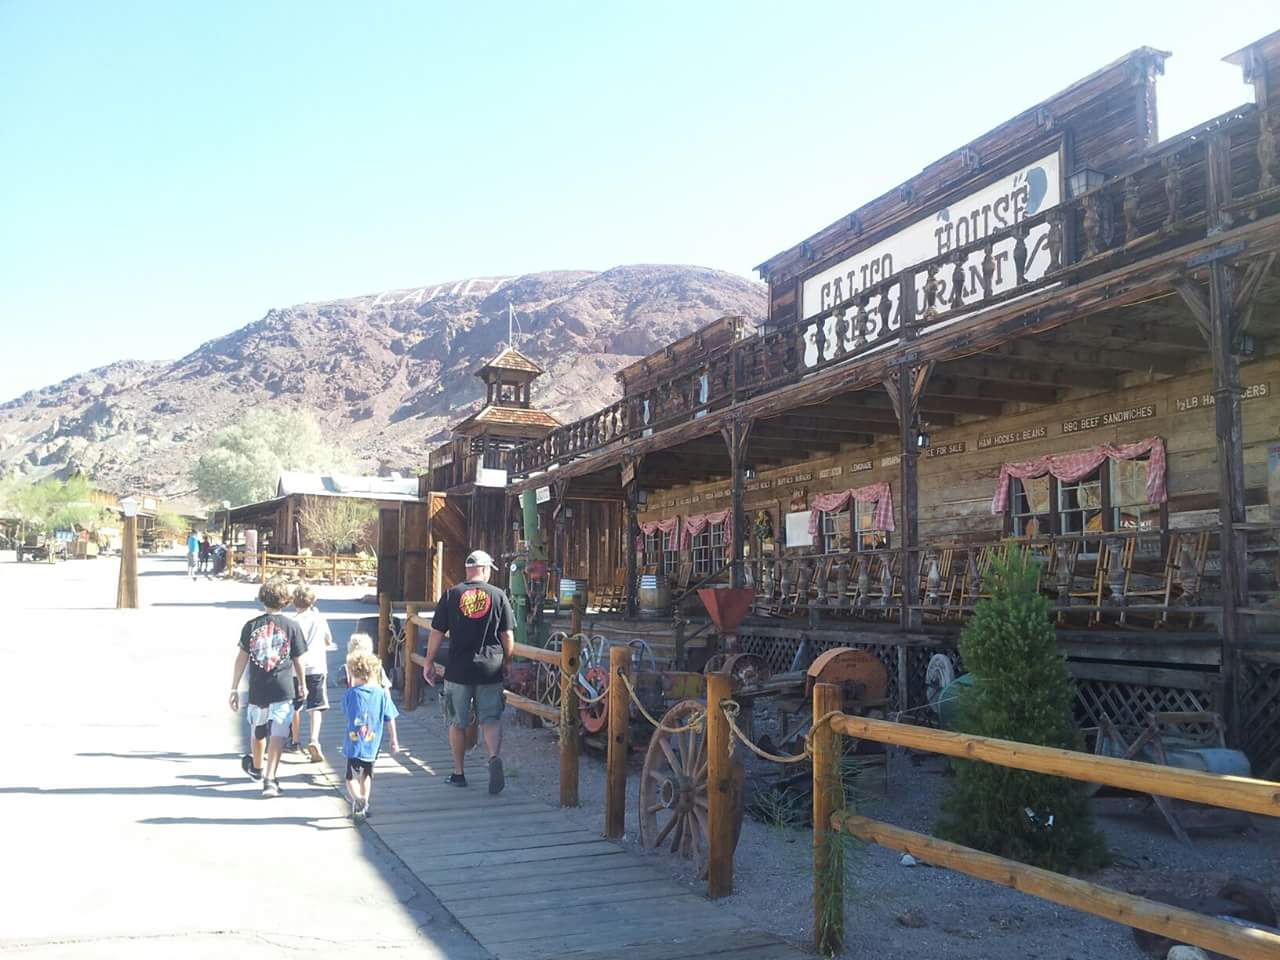 Camper submitted image from Calico Ghost Town - 2